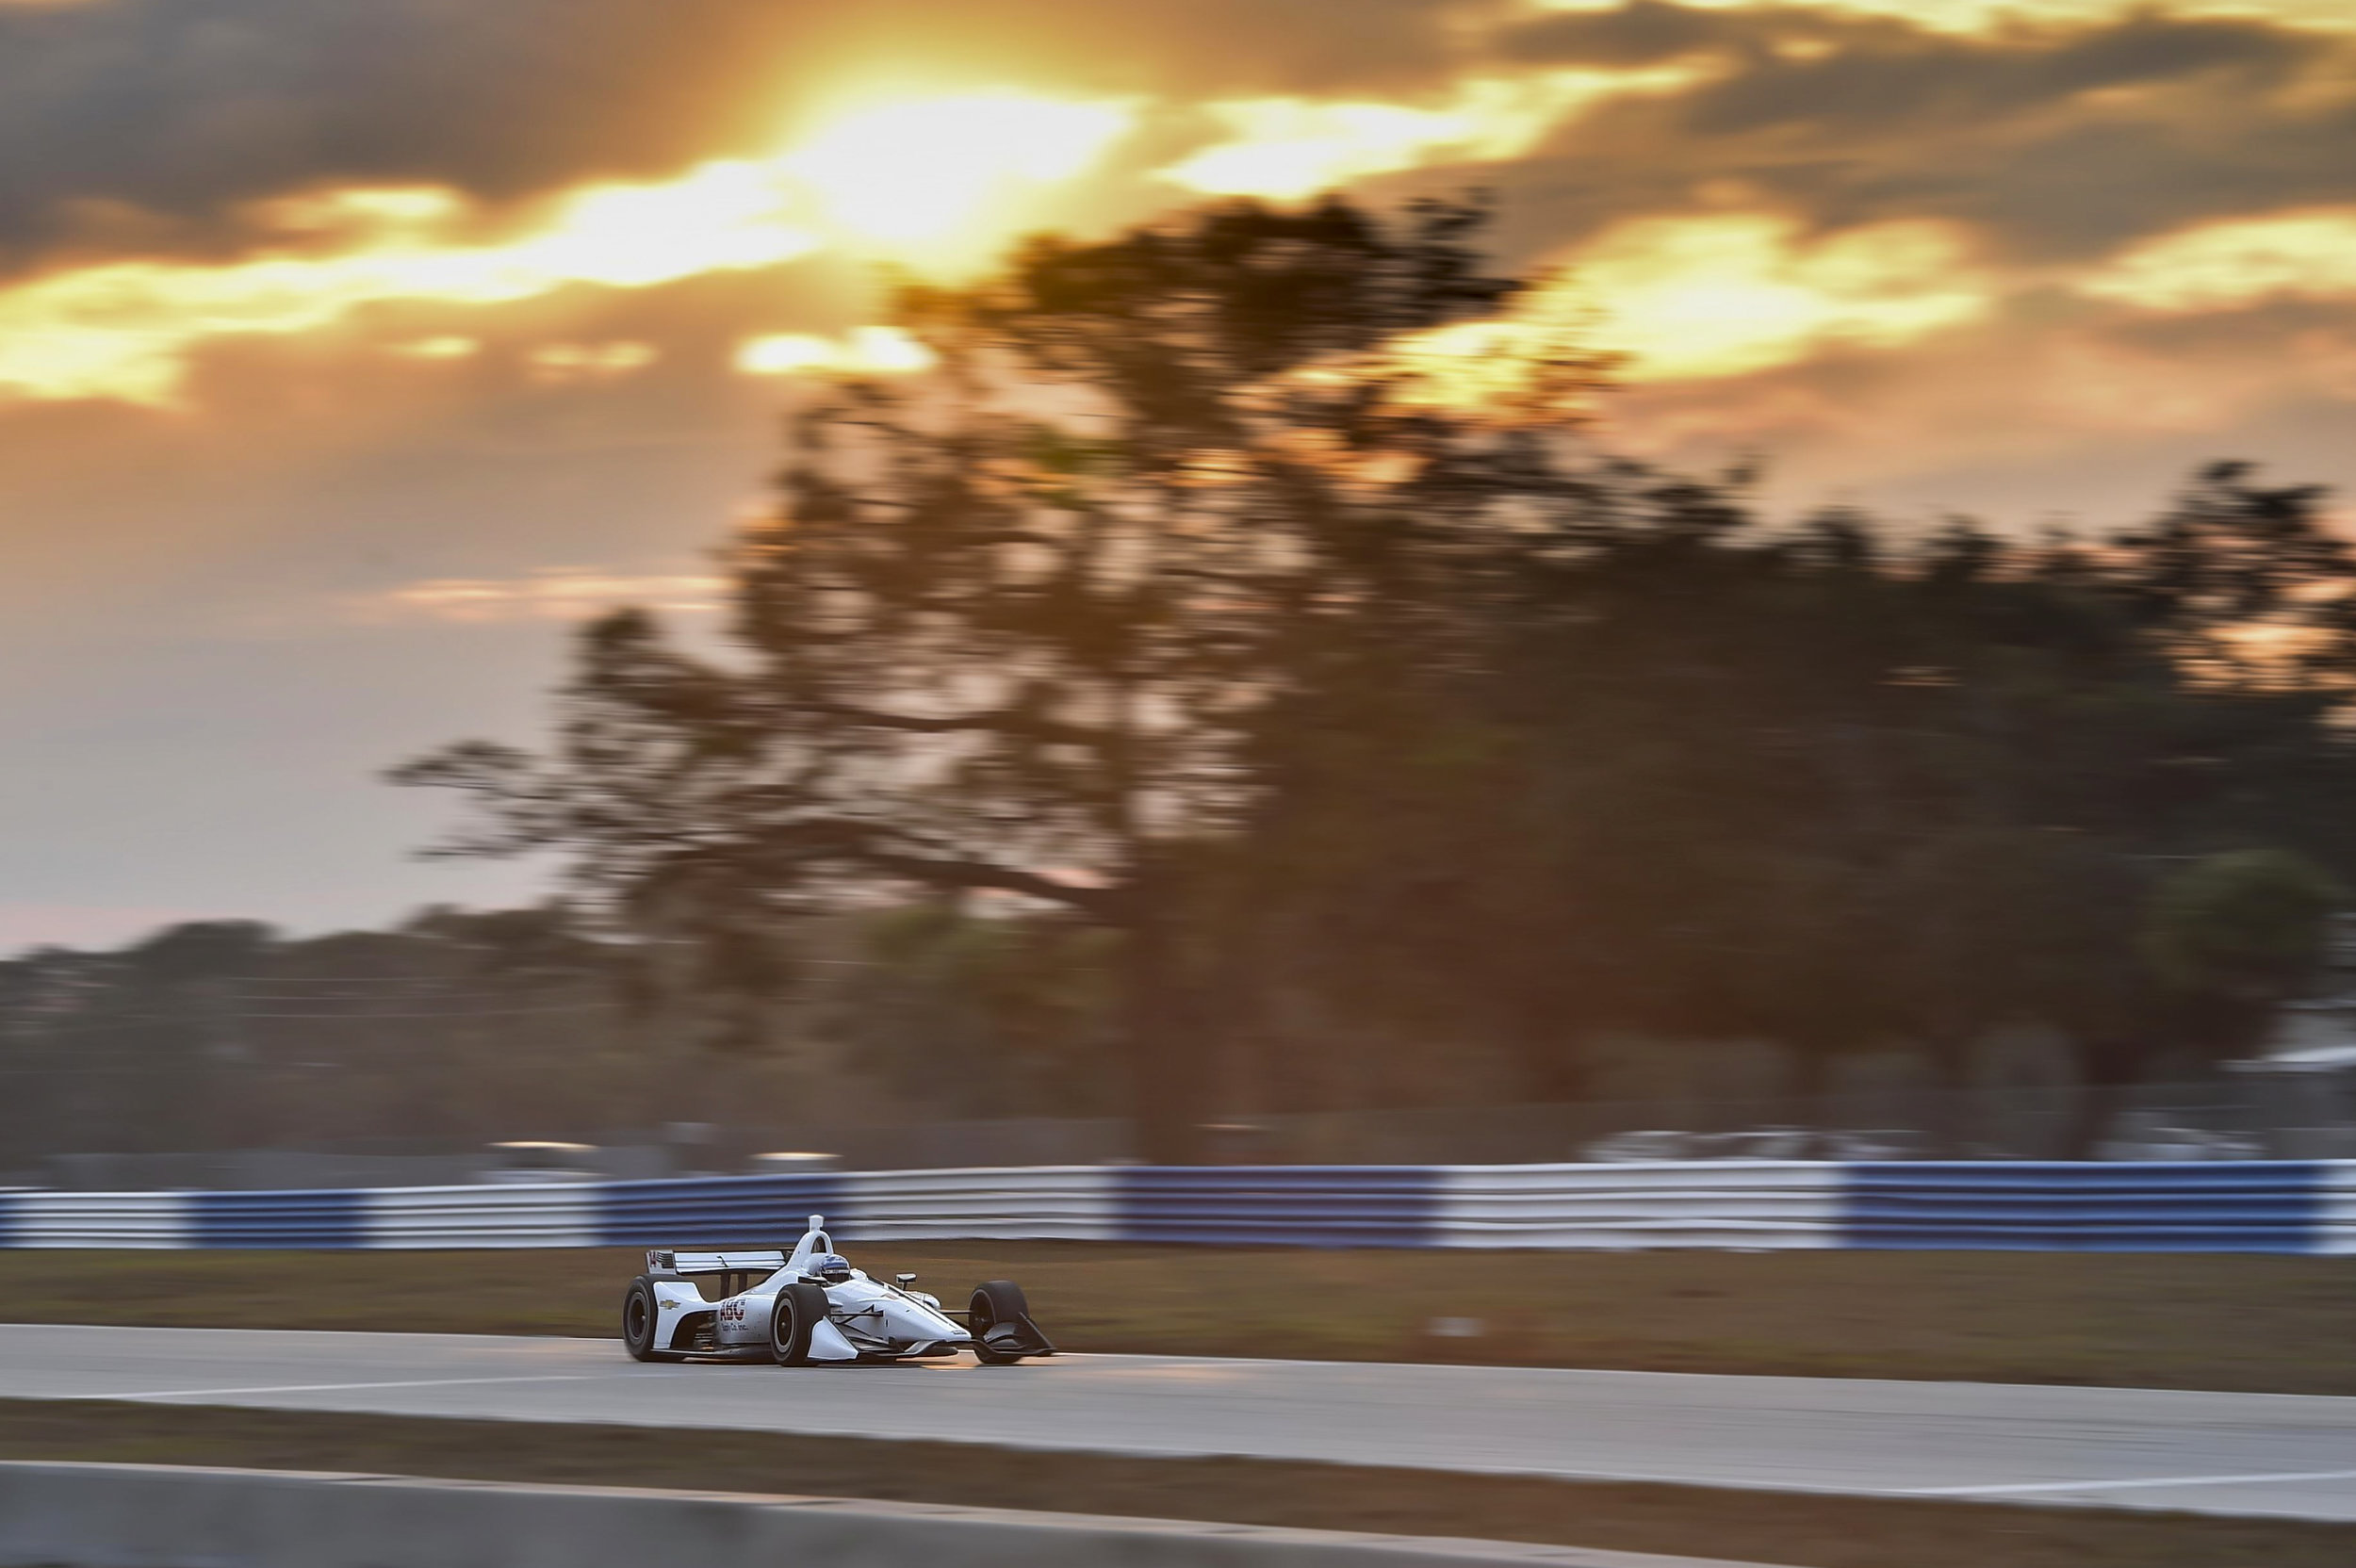  Sebring Testing, maybe the best light I captured in a racing photo all year. -  